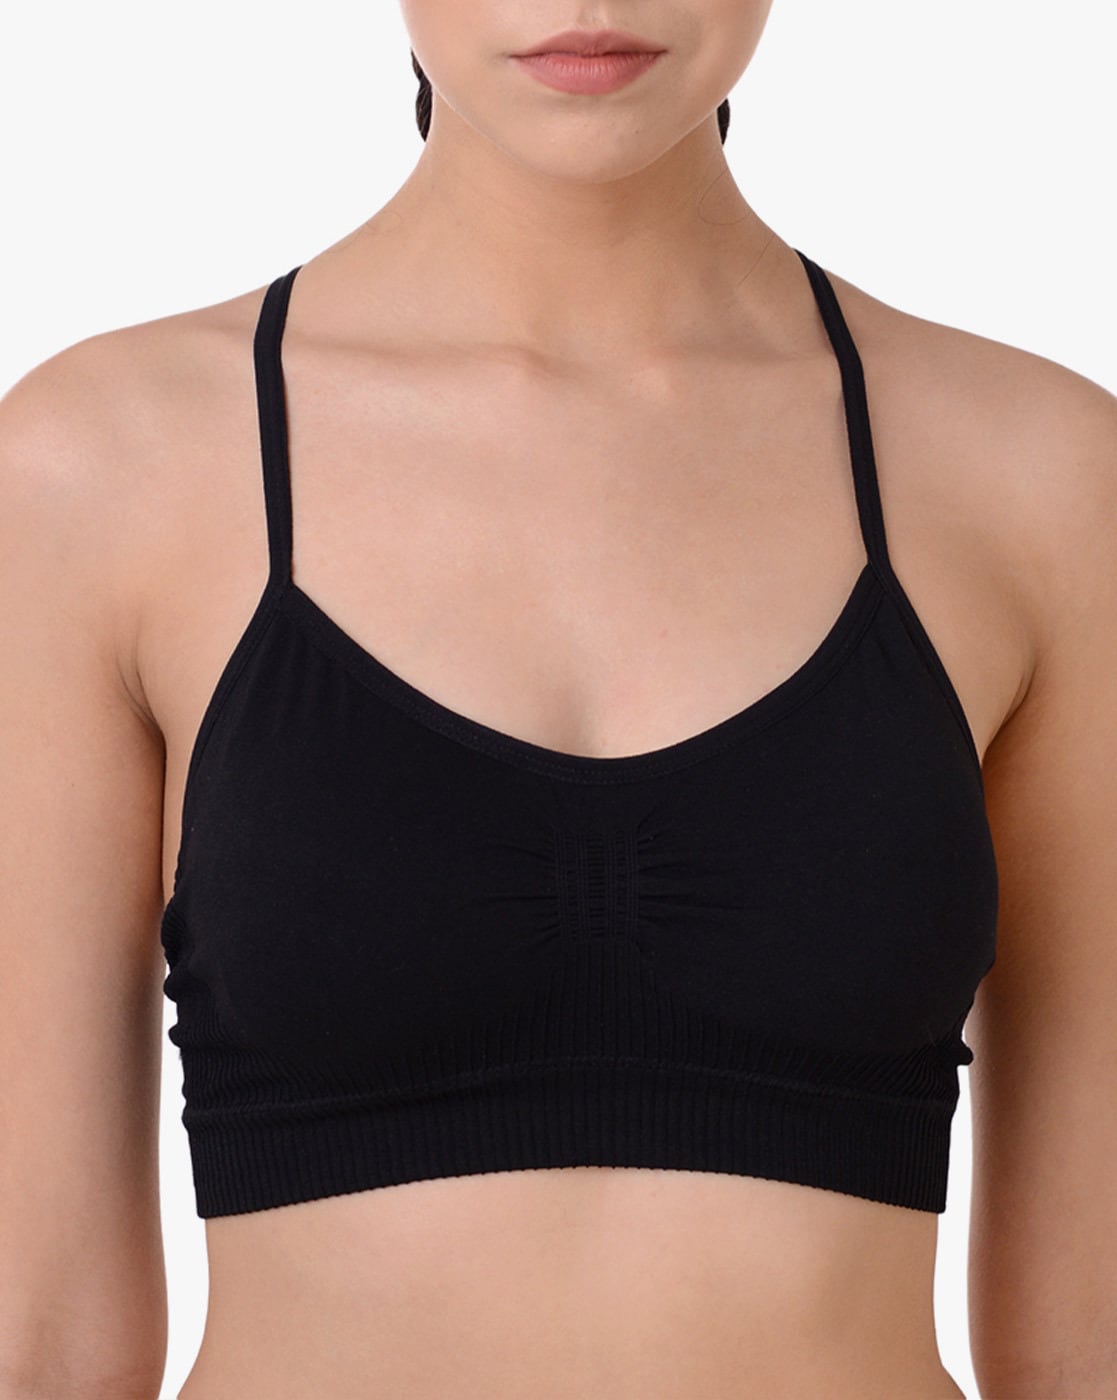 Textured Sports Bra with Criss-Cross Back